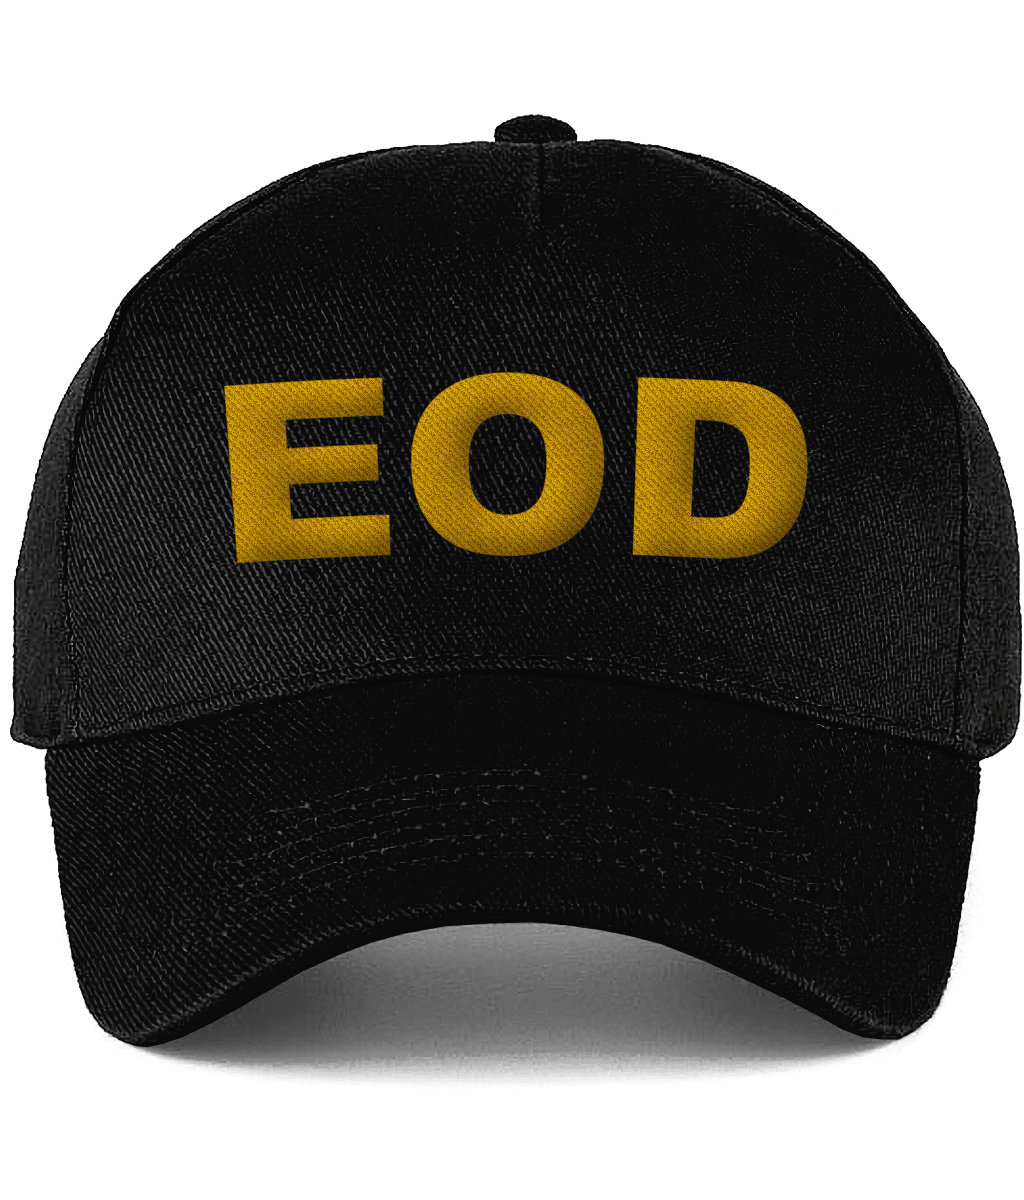 EOD Cap - Divers Gifts